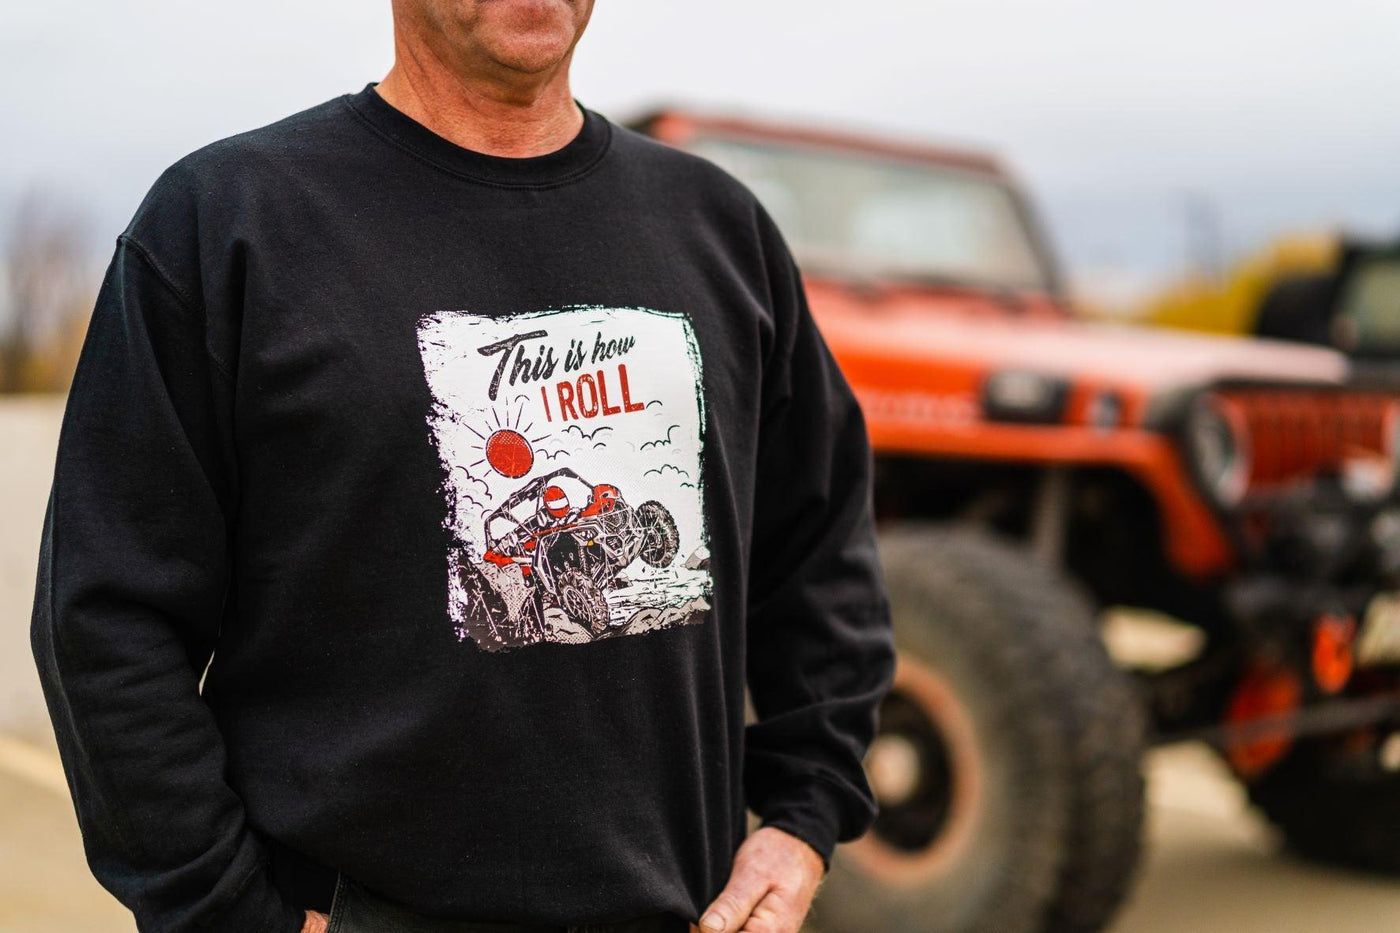 This is How I Roll Sweatshirt - Goats Trail